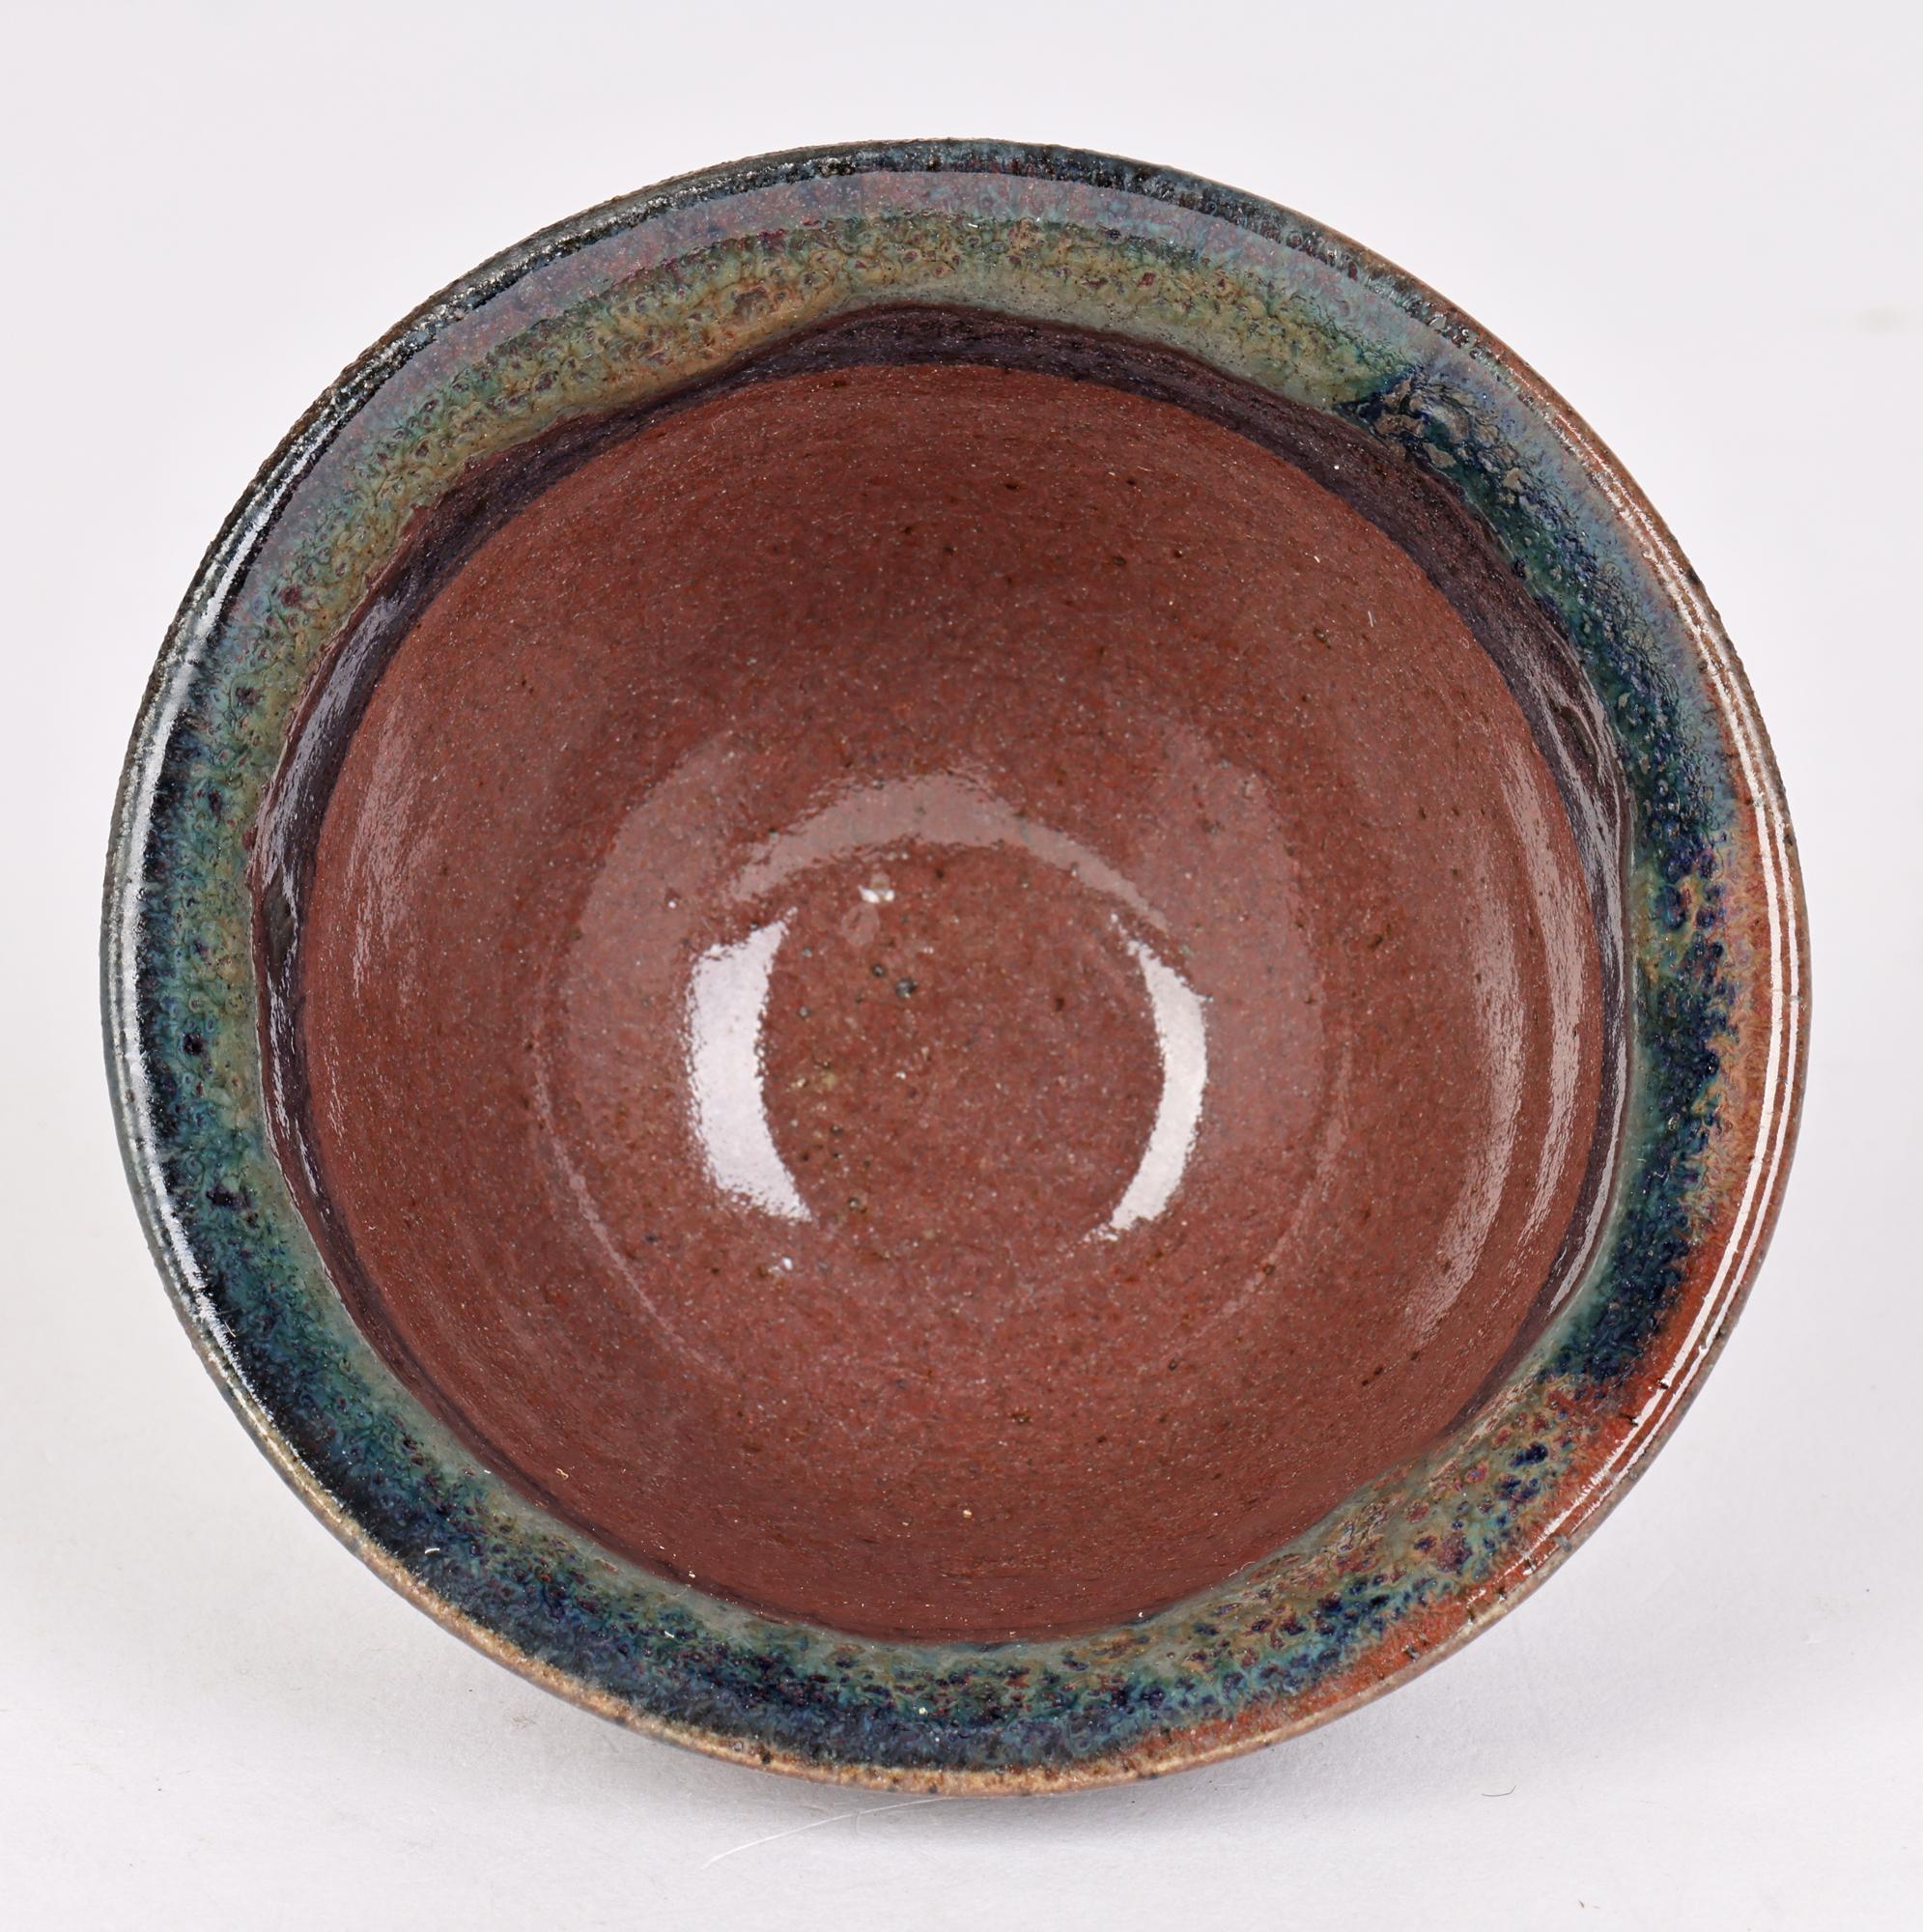 Eric James Mellon Studio Pottery Experimental Glazed Cup 2006  In Good Condition For Sale In Bishop's Stortford, Hertfordshire